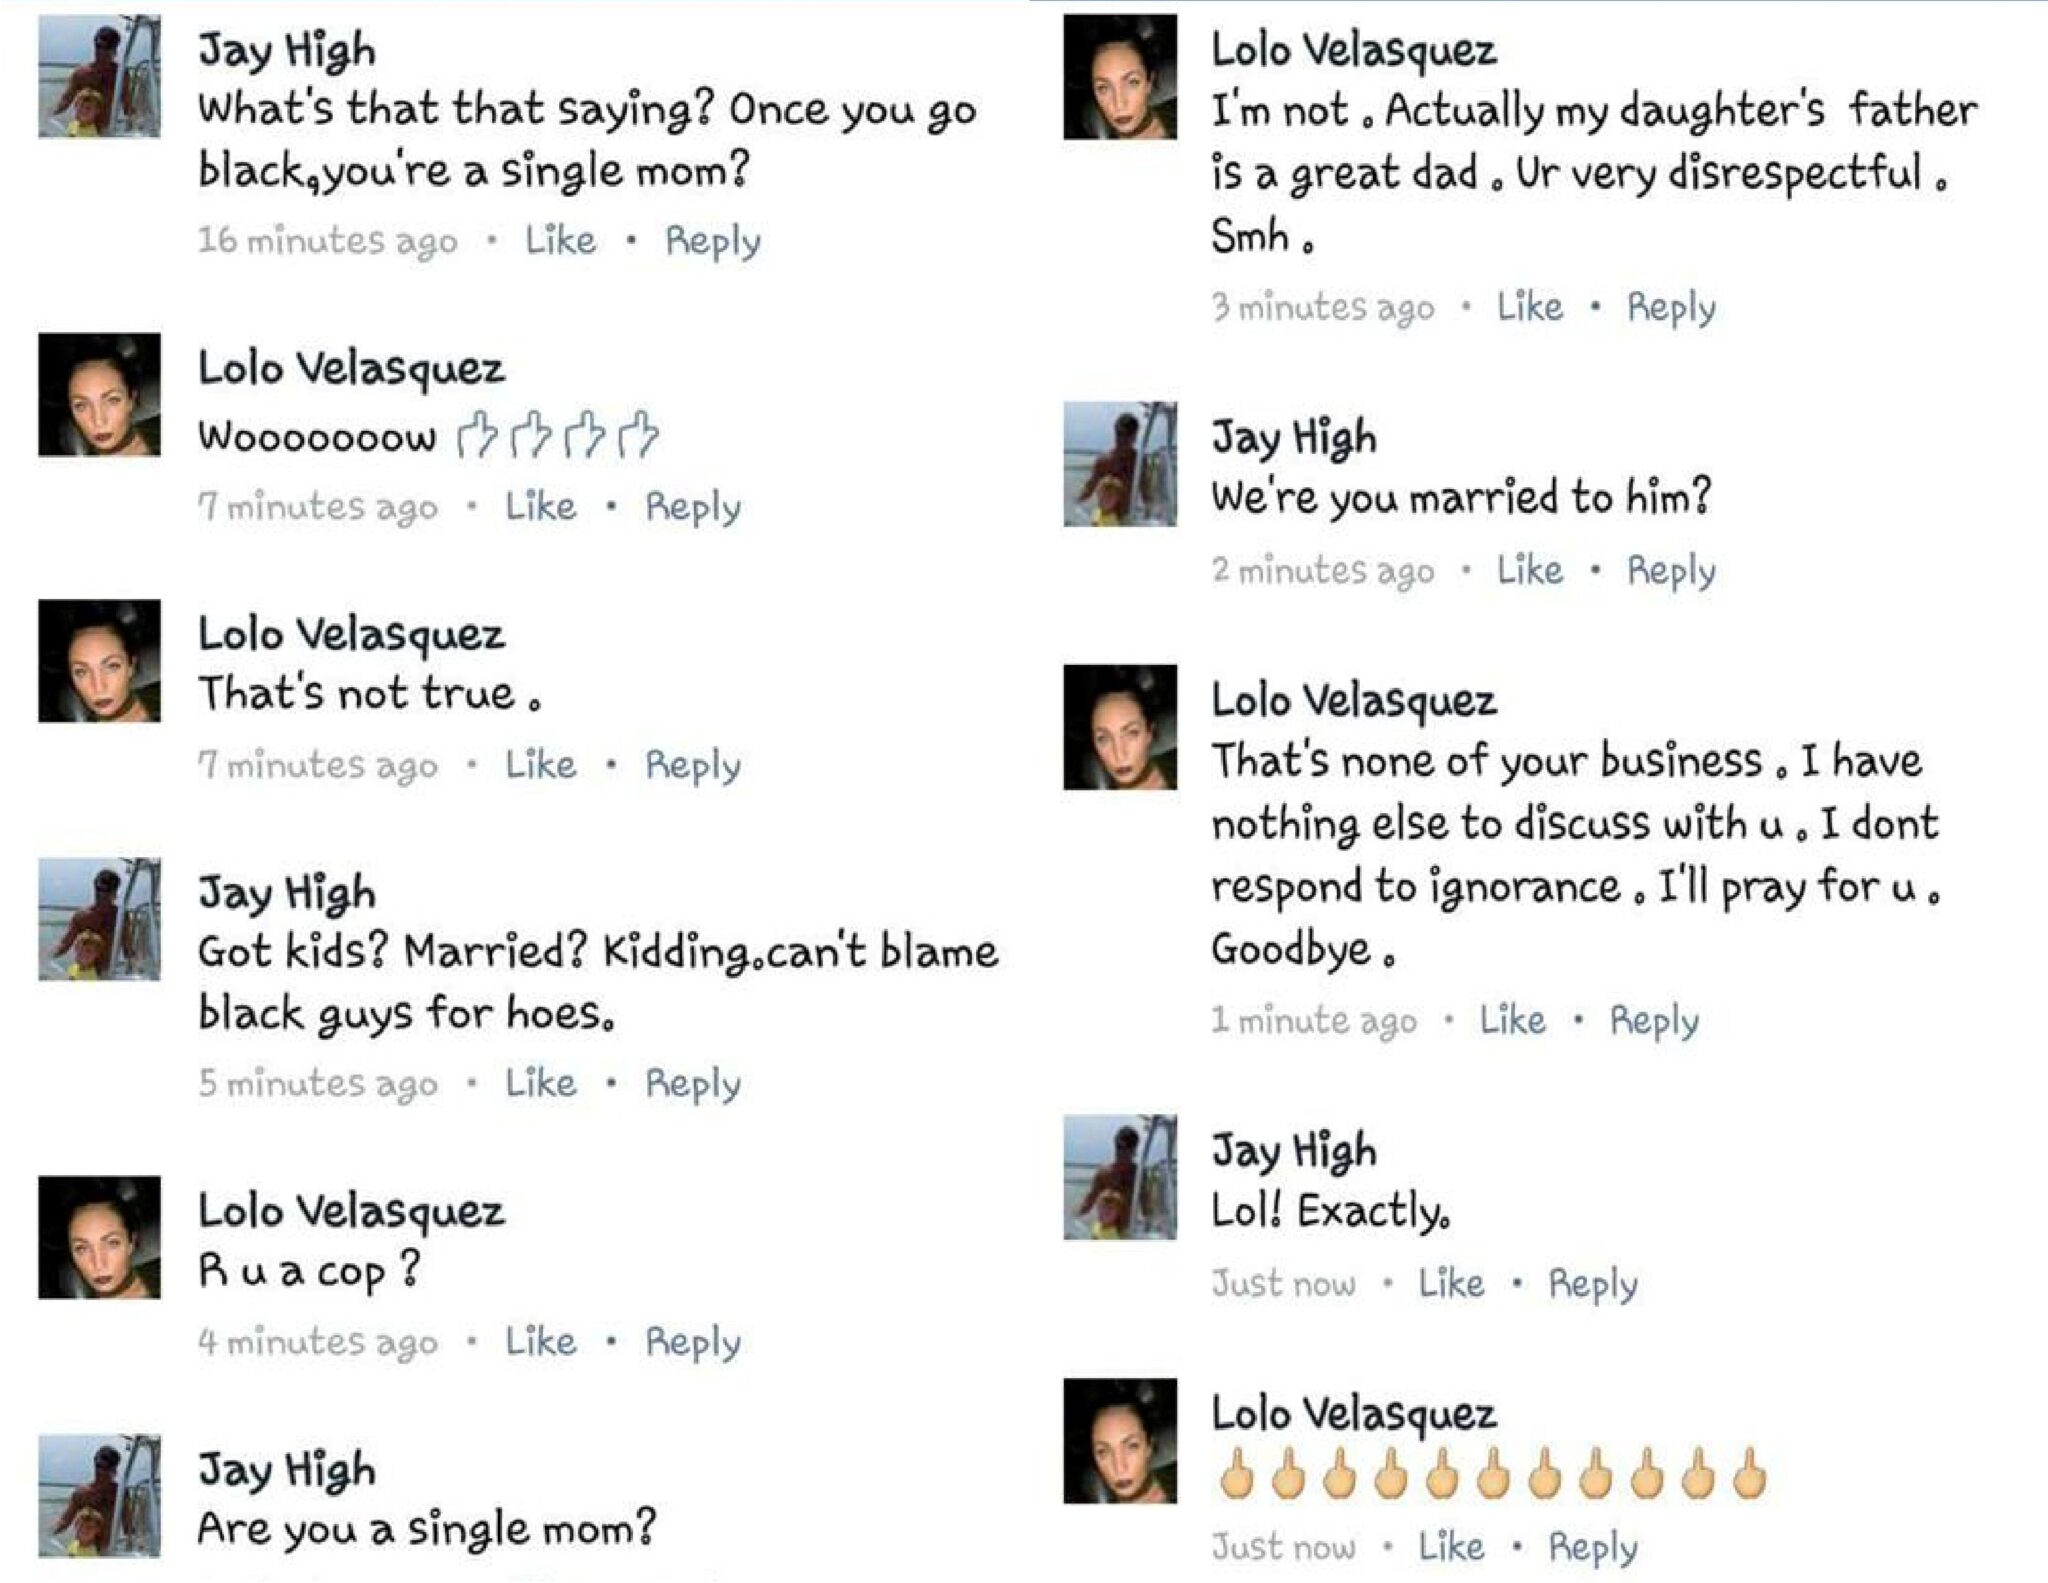 Pictured: Facebook exchange between Chief Jay High and 